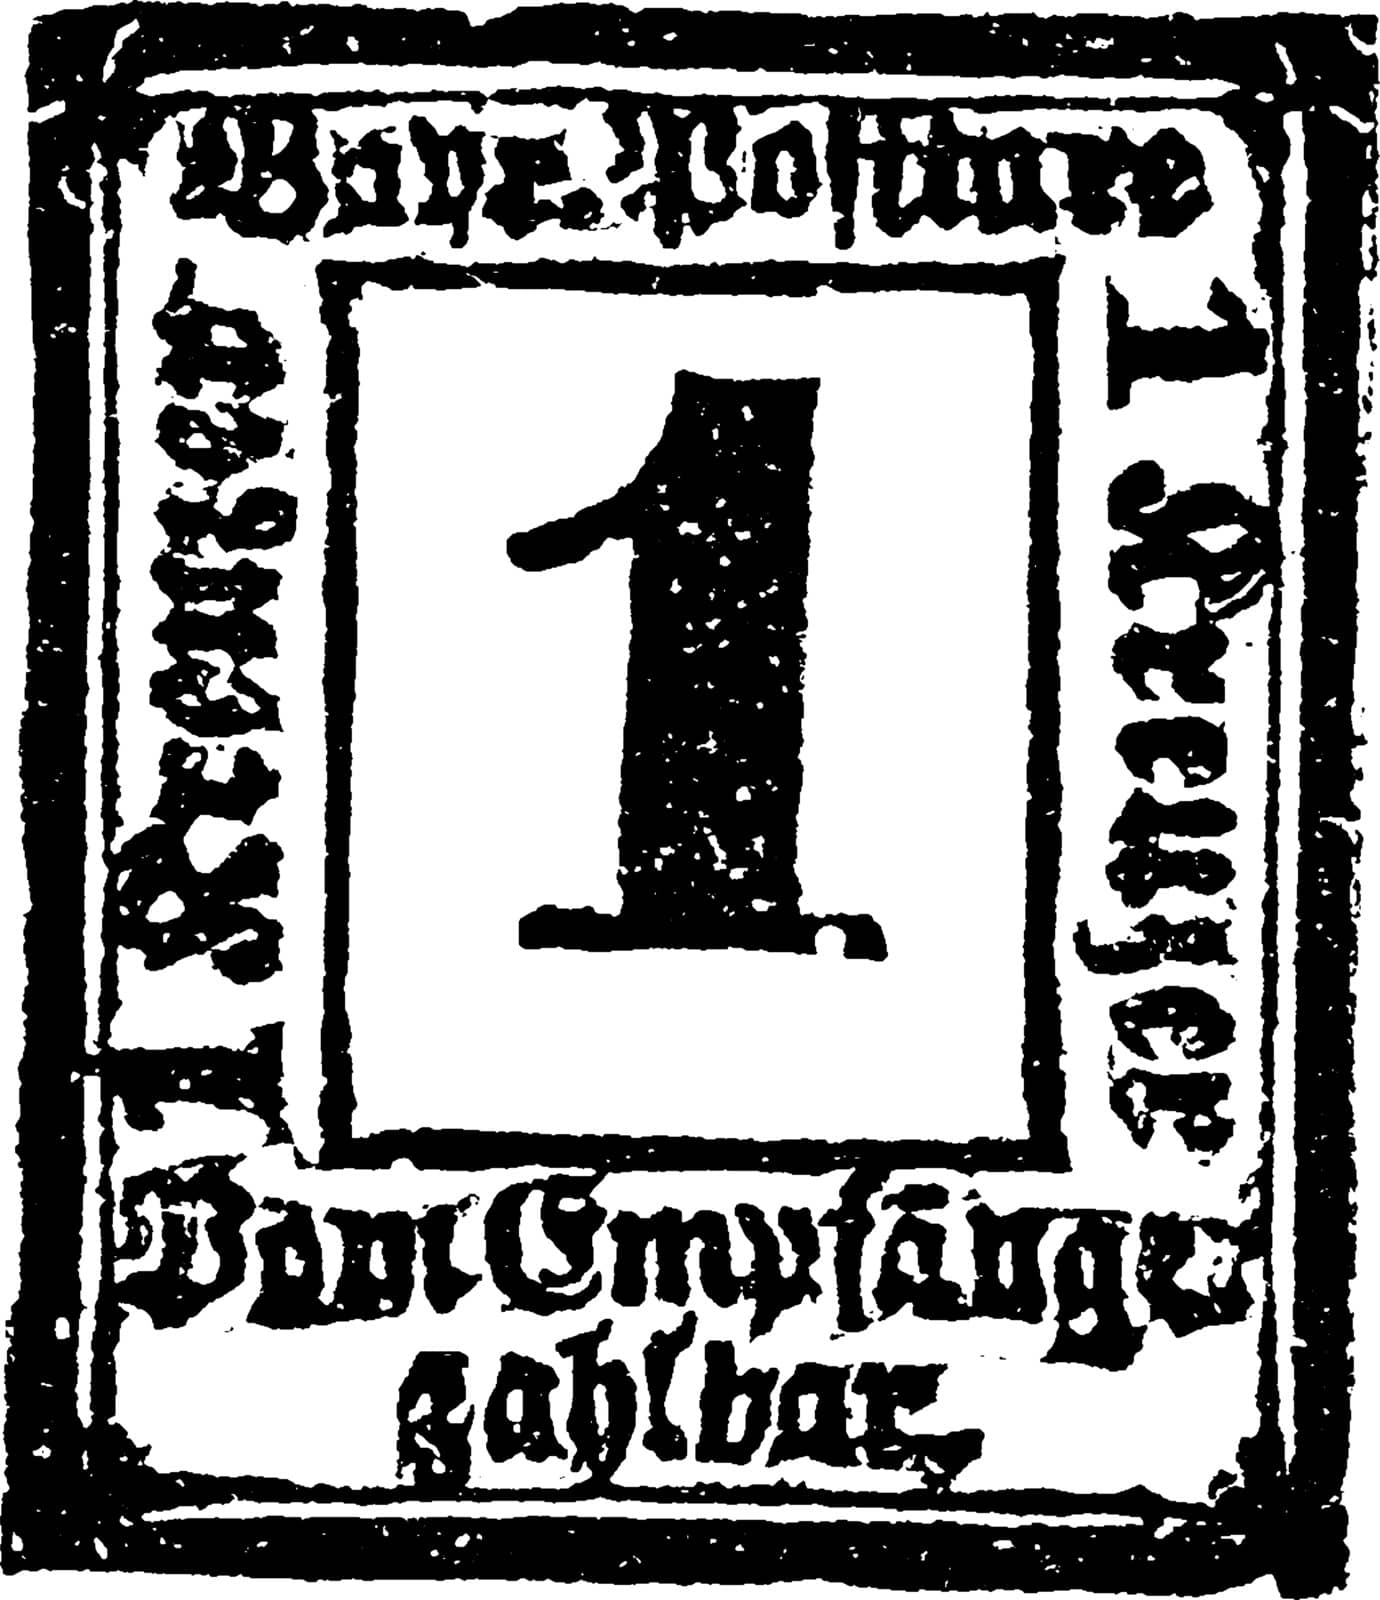 This image represents Bavaria Return Letter Stamp Unknown Value in 1865, vintage line drawing or engraving illustration.